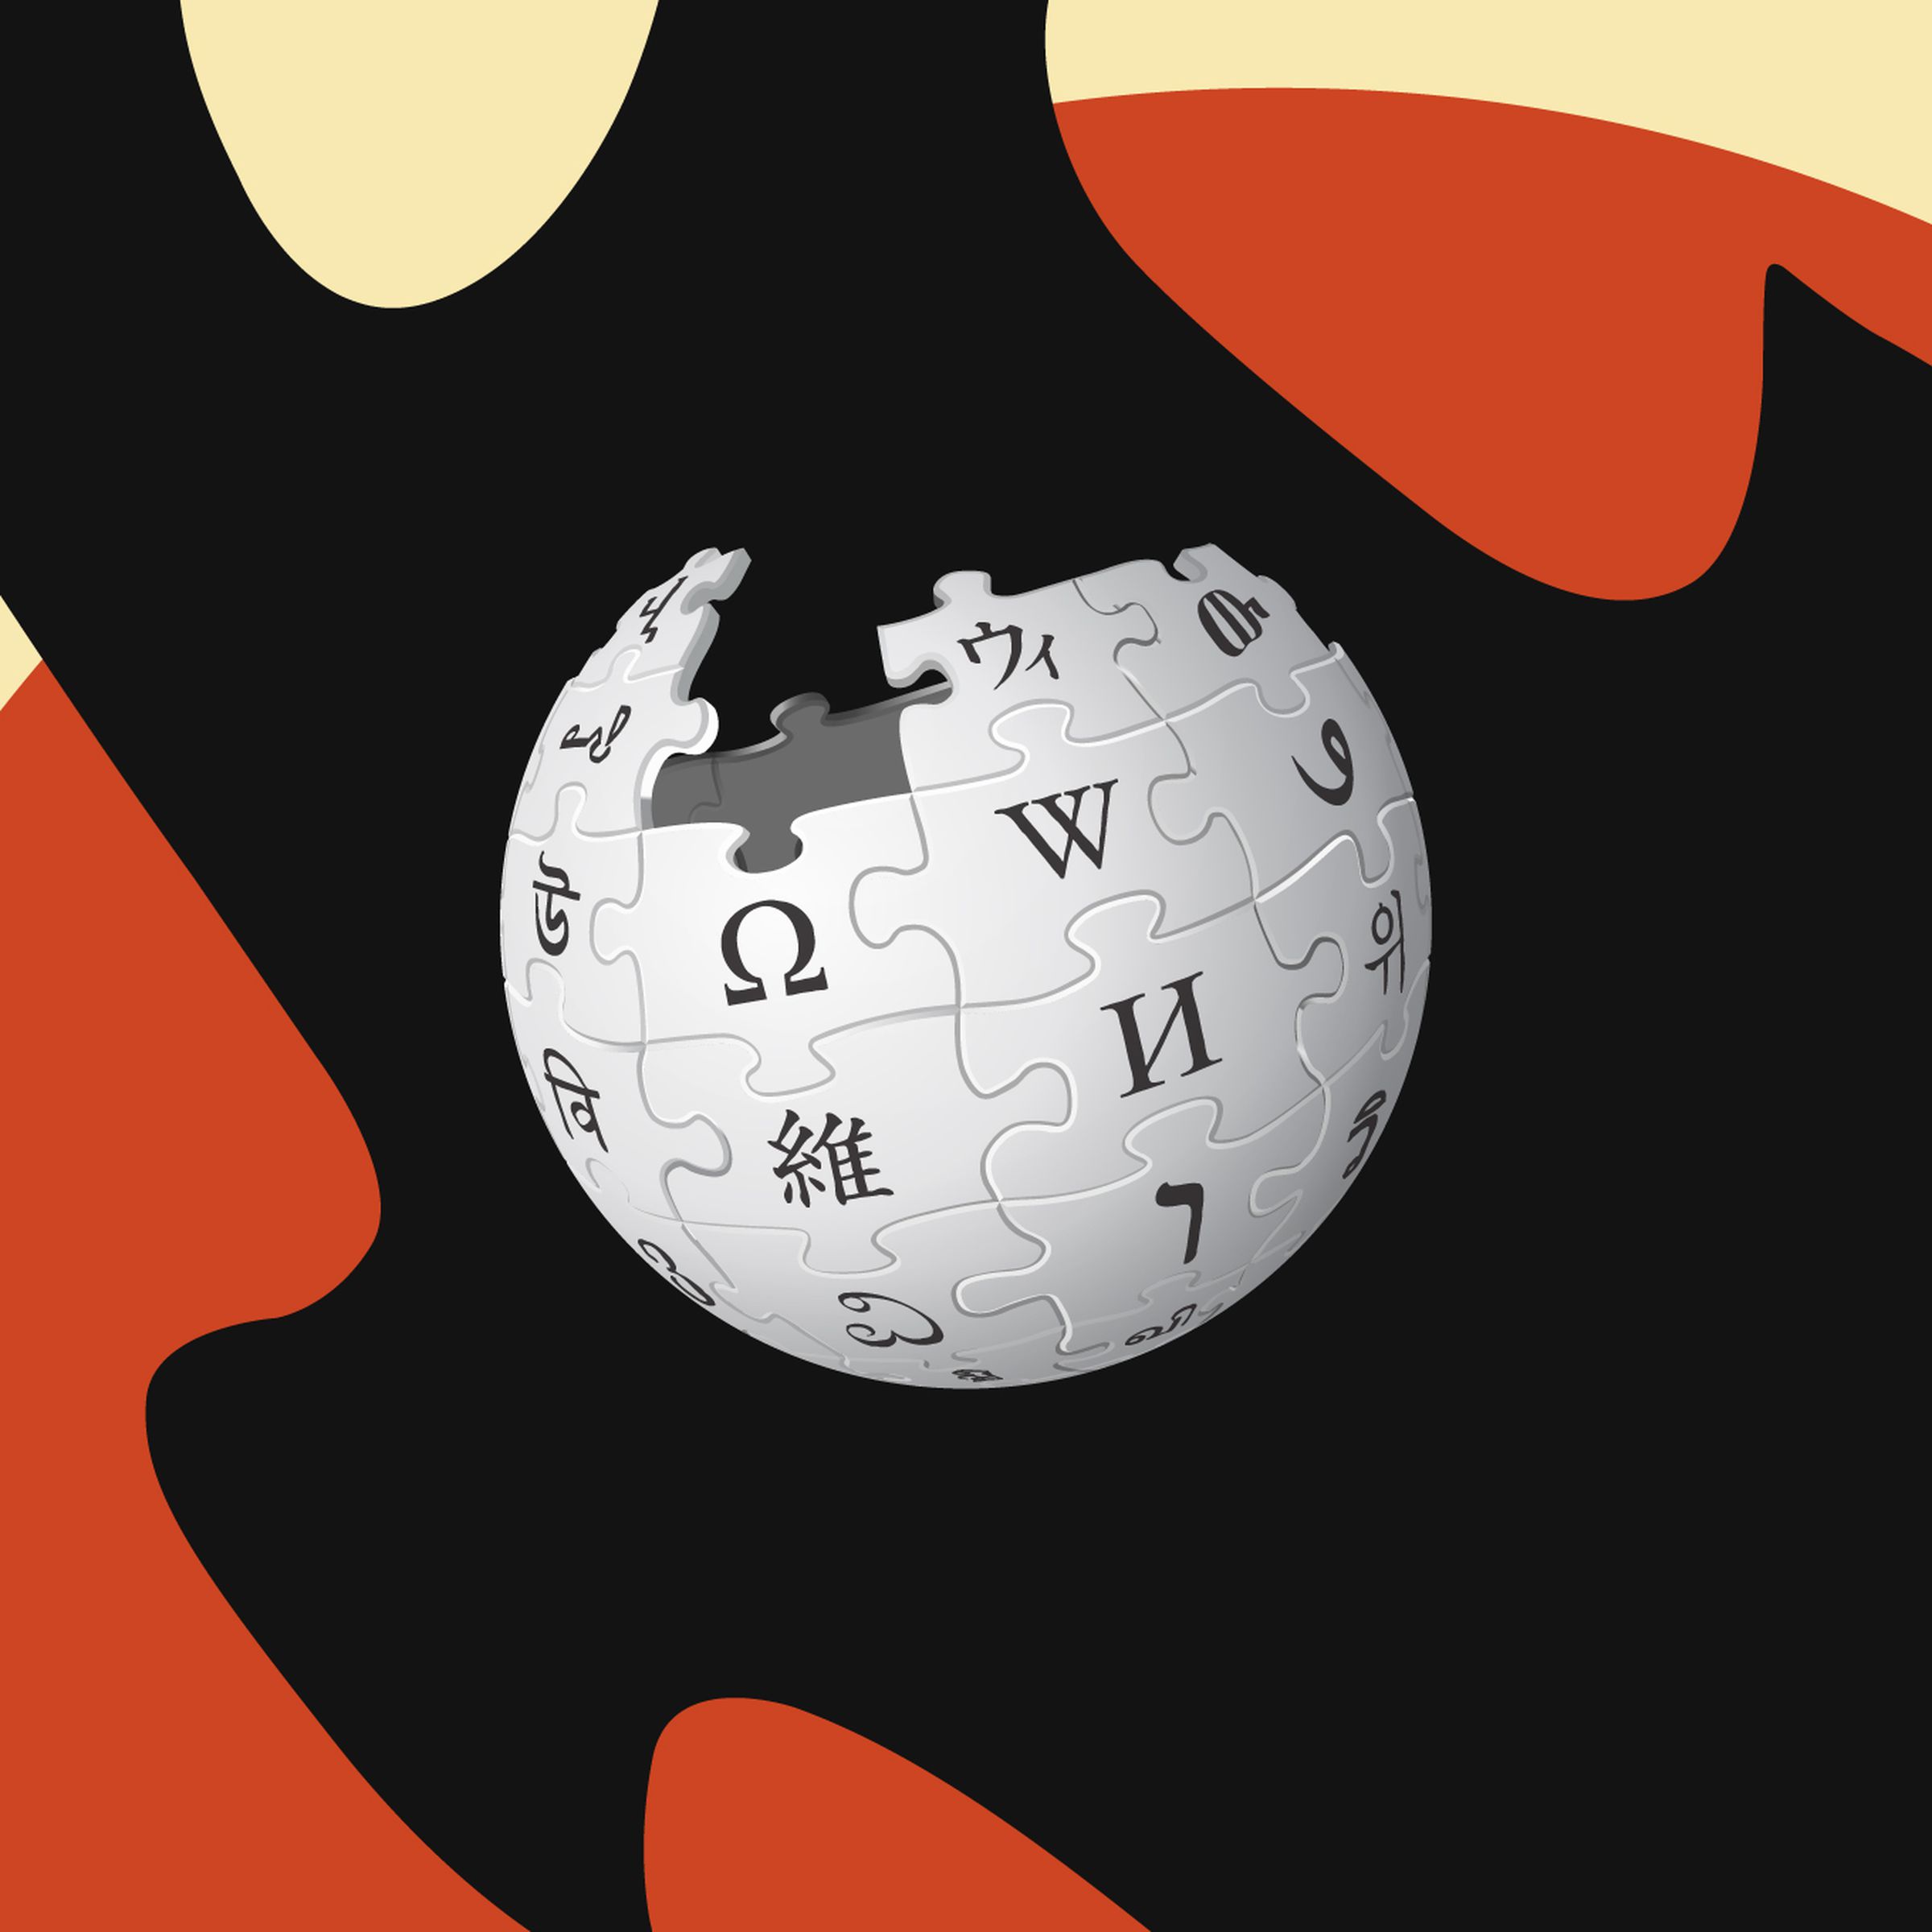 Illustration of the Wikipedia logo on a black, red, and tan background.